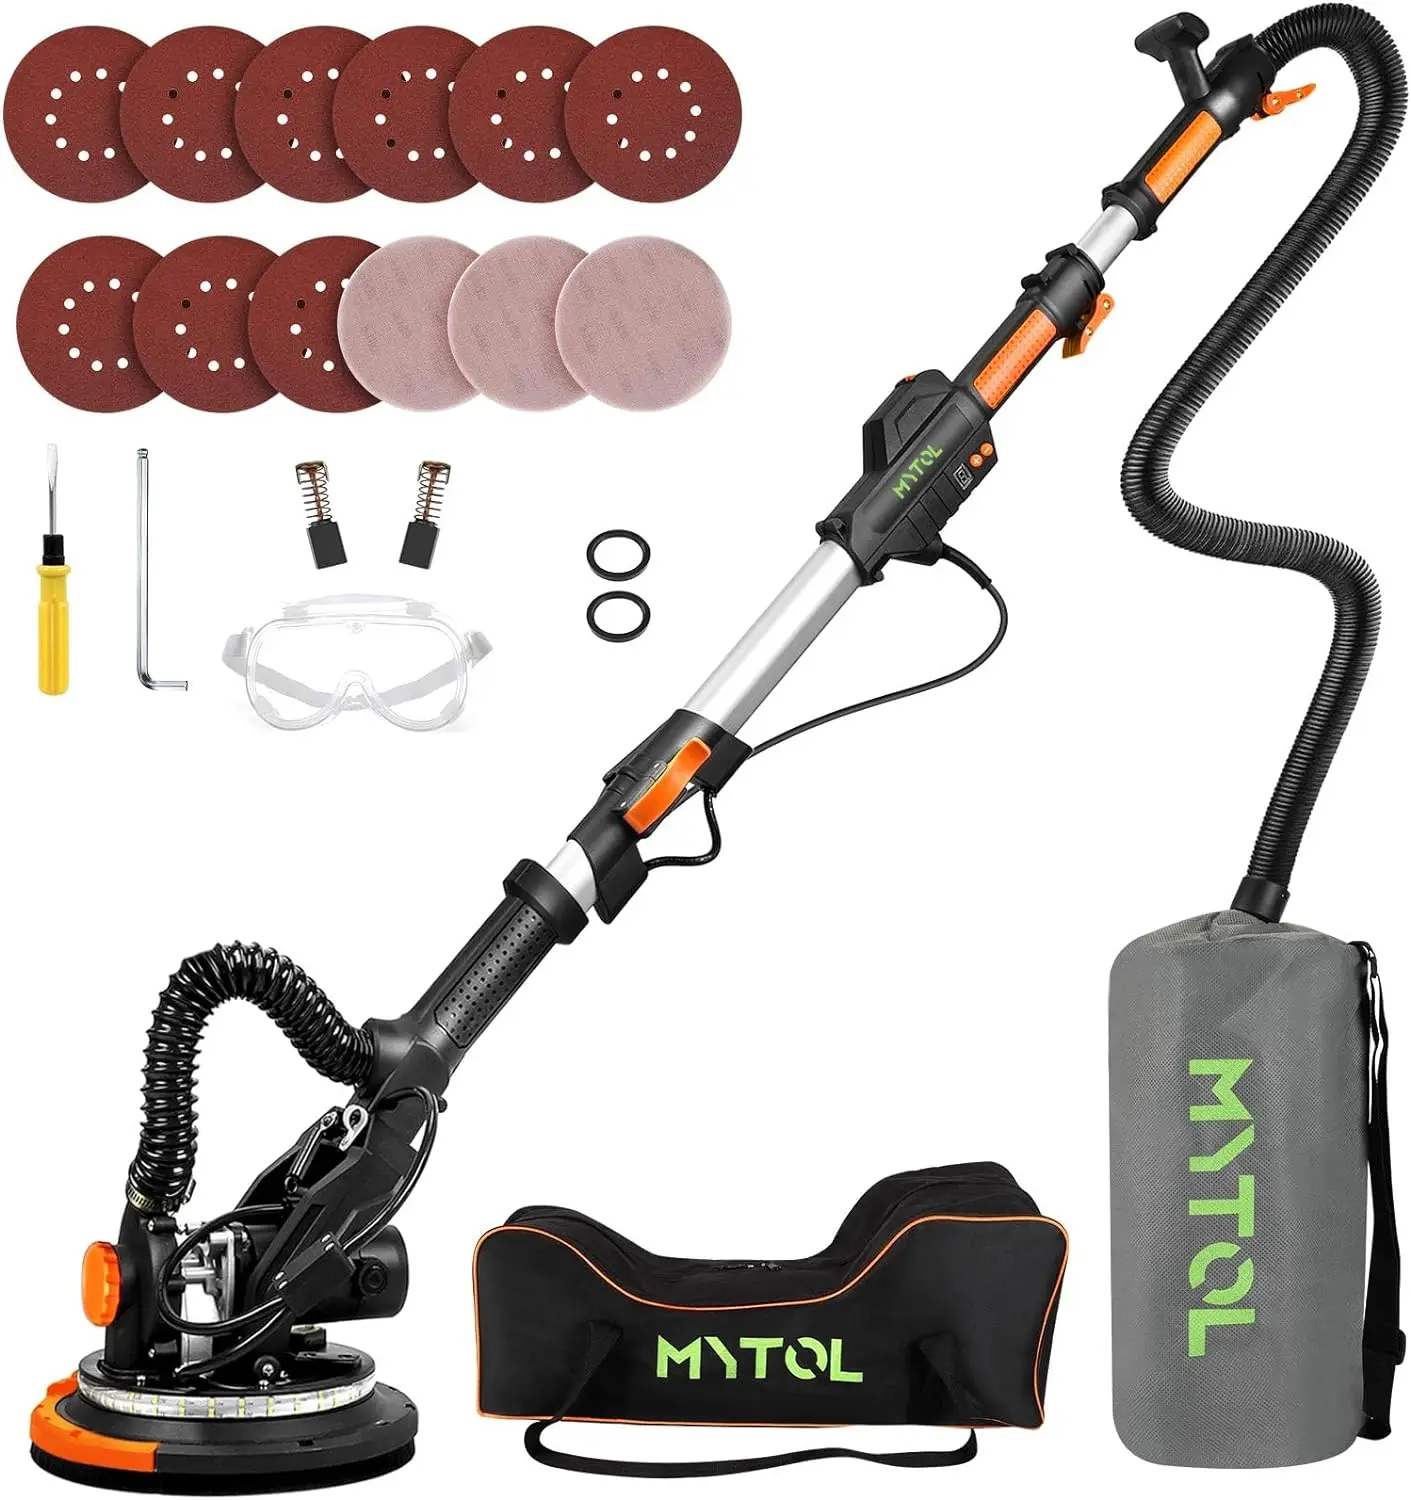 

Electric Drywall Sander with Vacuum Dust Collection, Variable Speed, LED Light, Foldable Handle, Sanding Discs & Grids